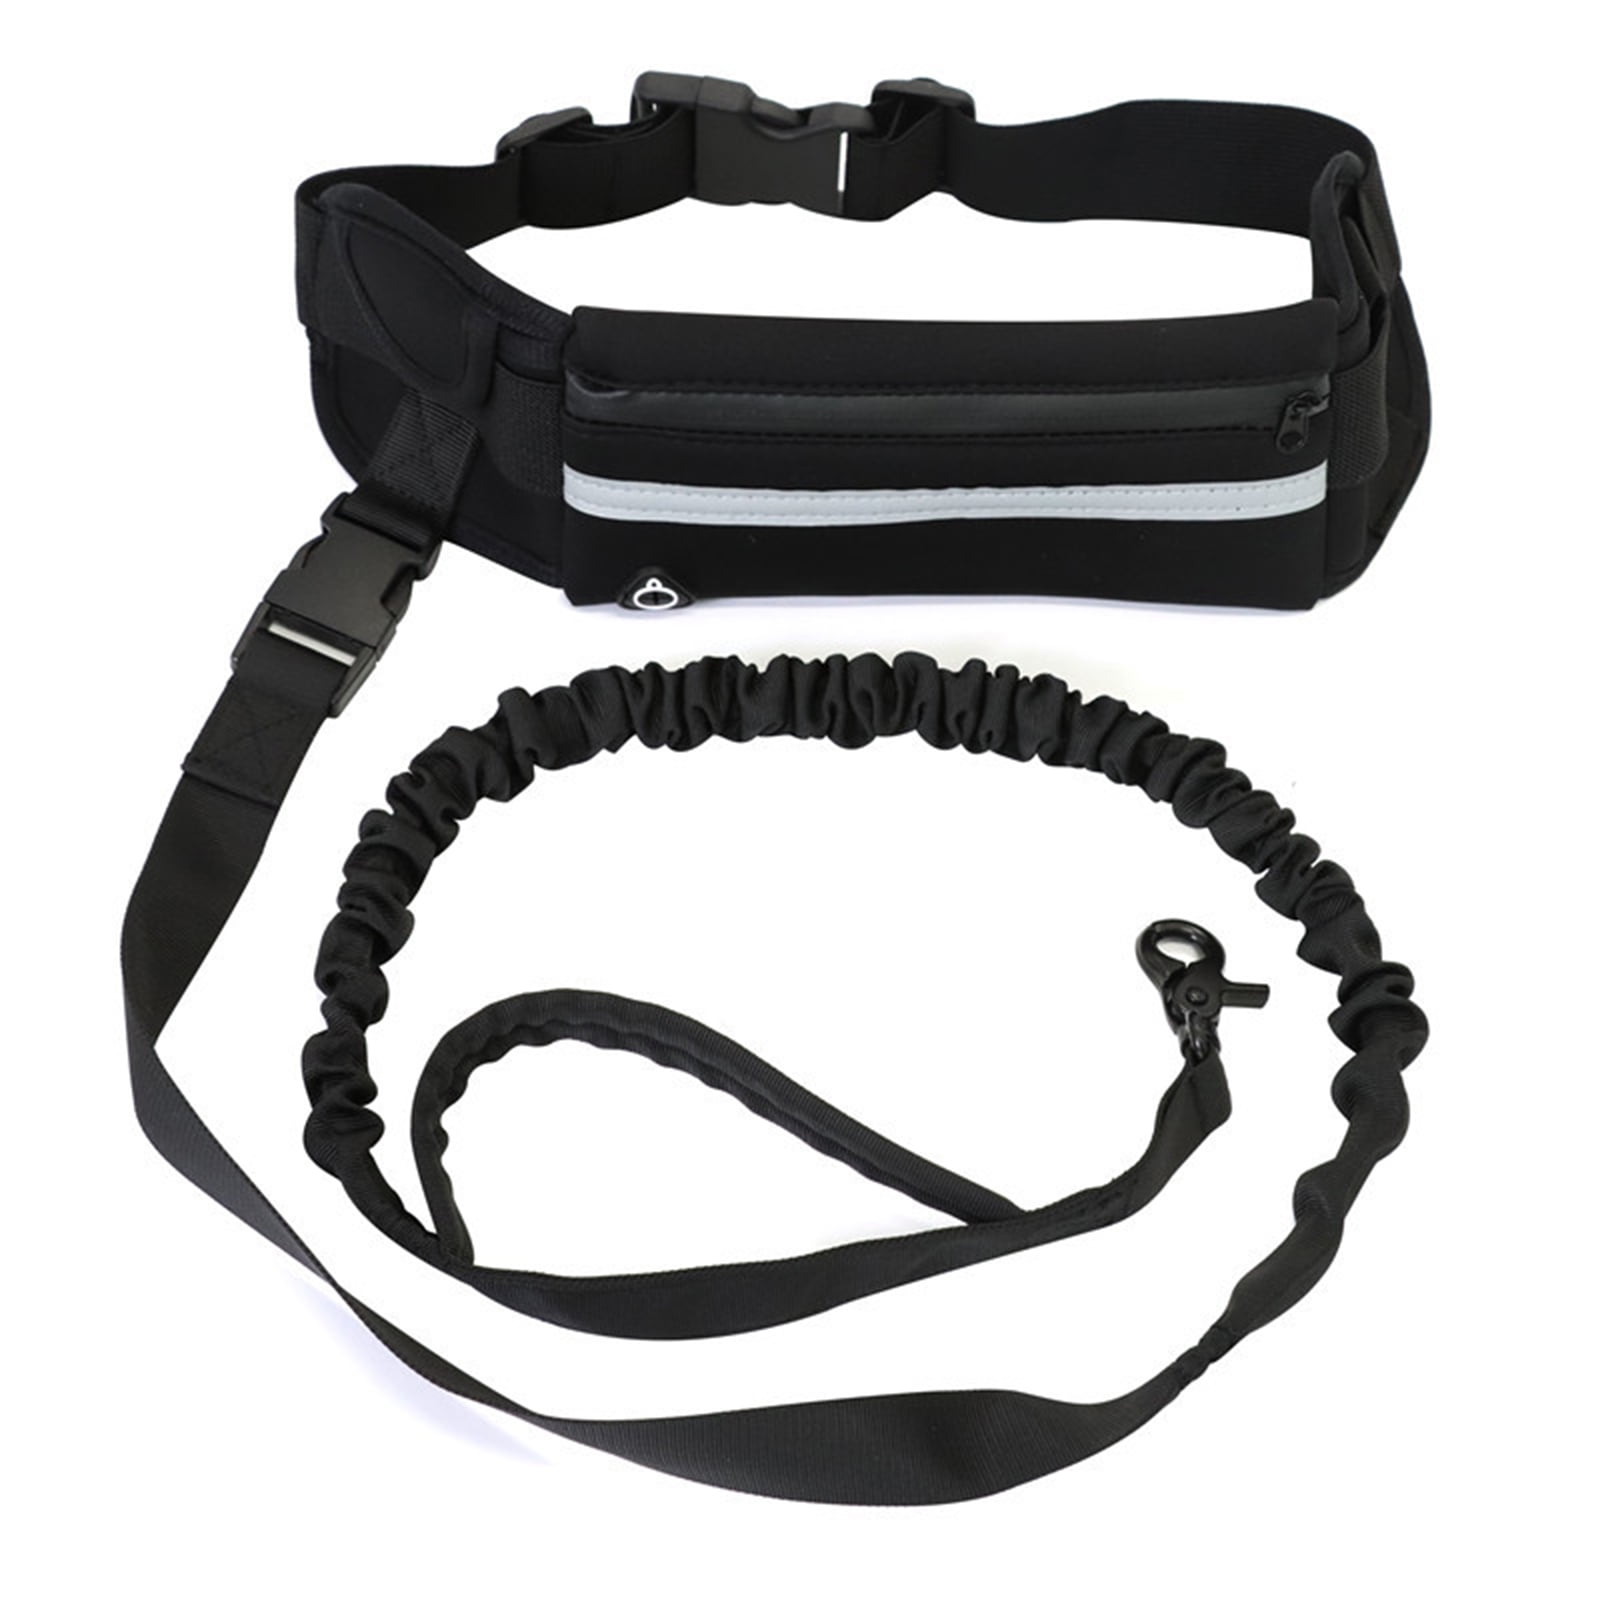 The Buddy System Hands Free Dog Leash Adjustable Leash for Running Jogging Running and Buddy Bag Waist Belt Bag with Magnetic Closure for Pet Training Training and Service Dogs Regular, Black 